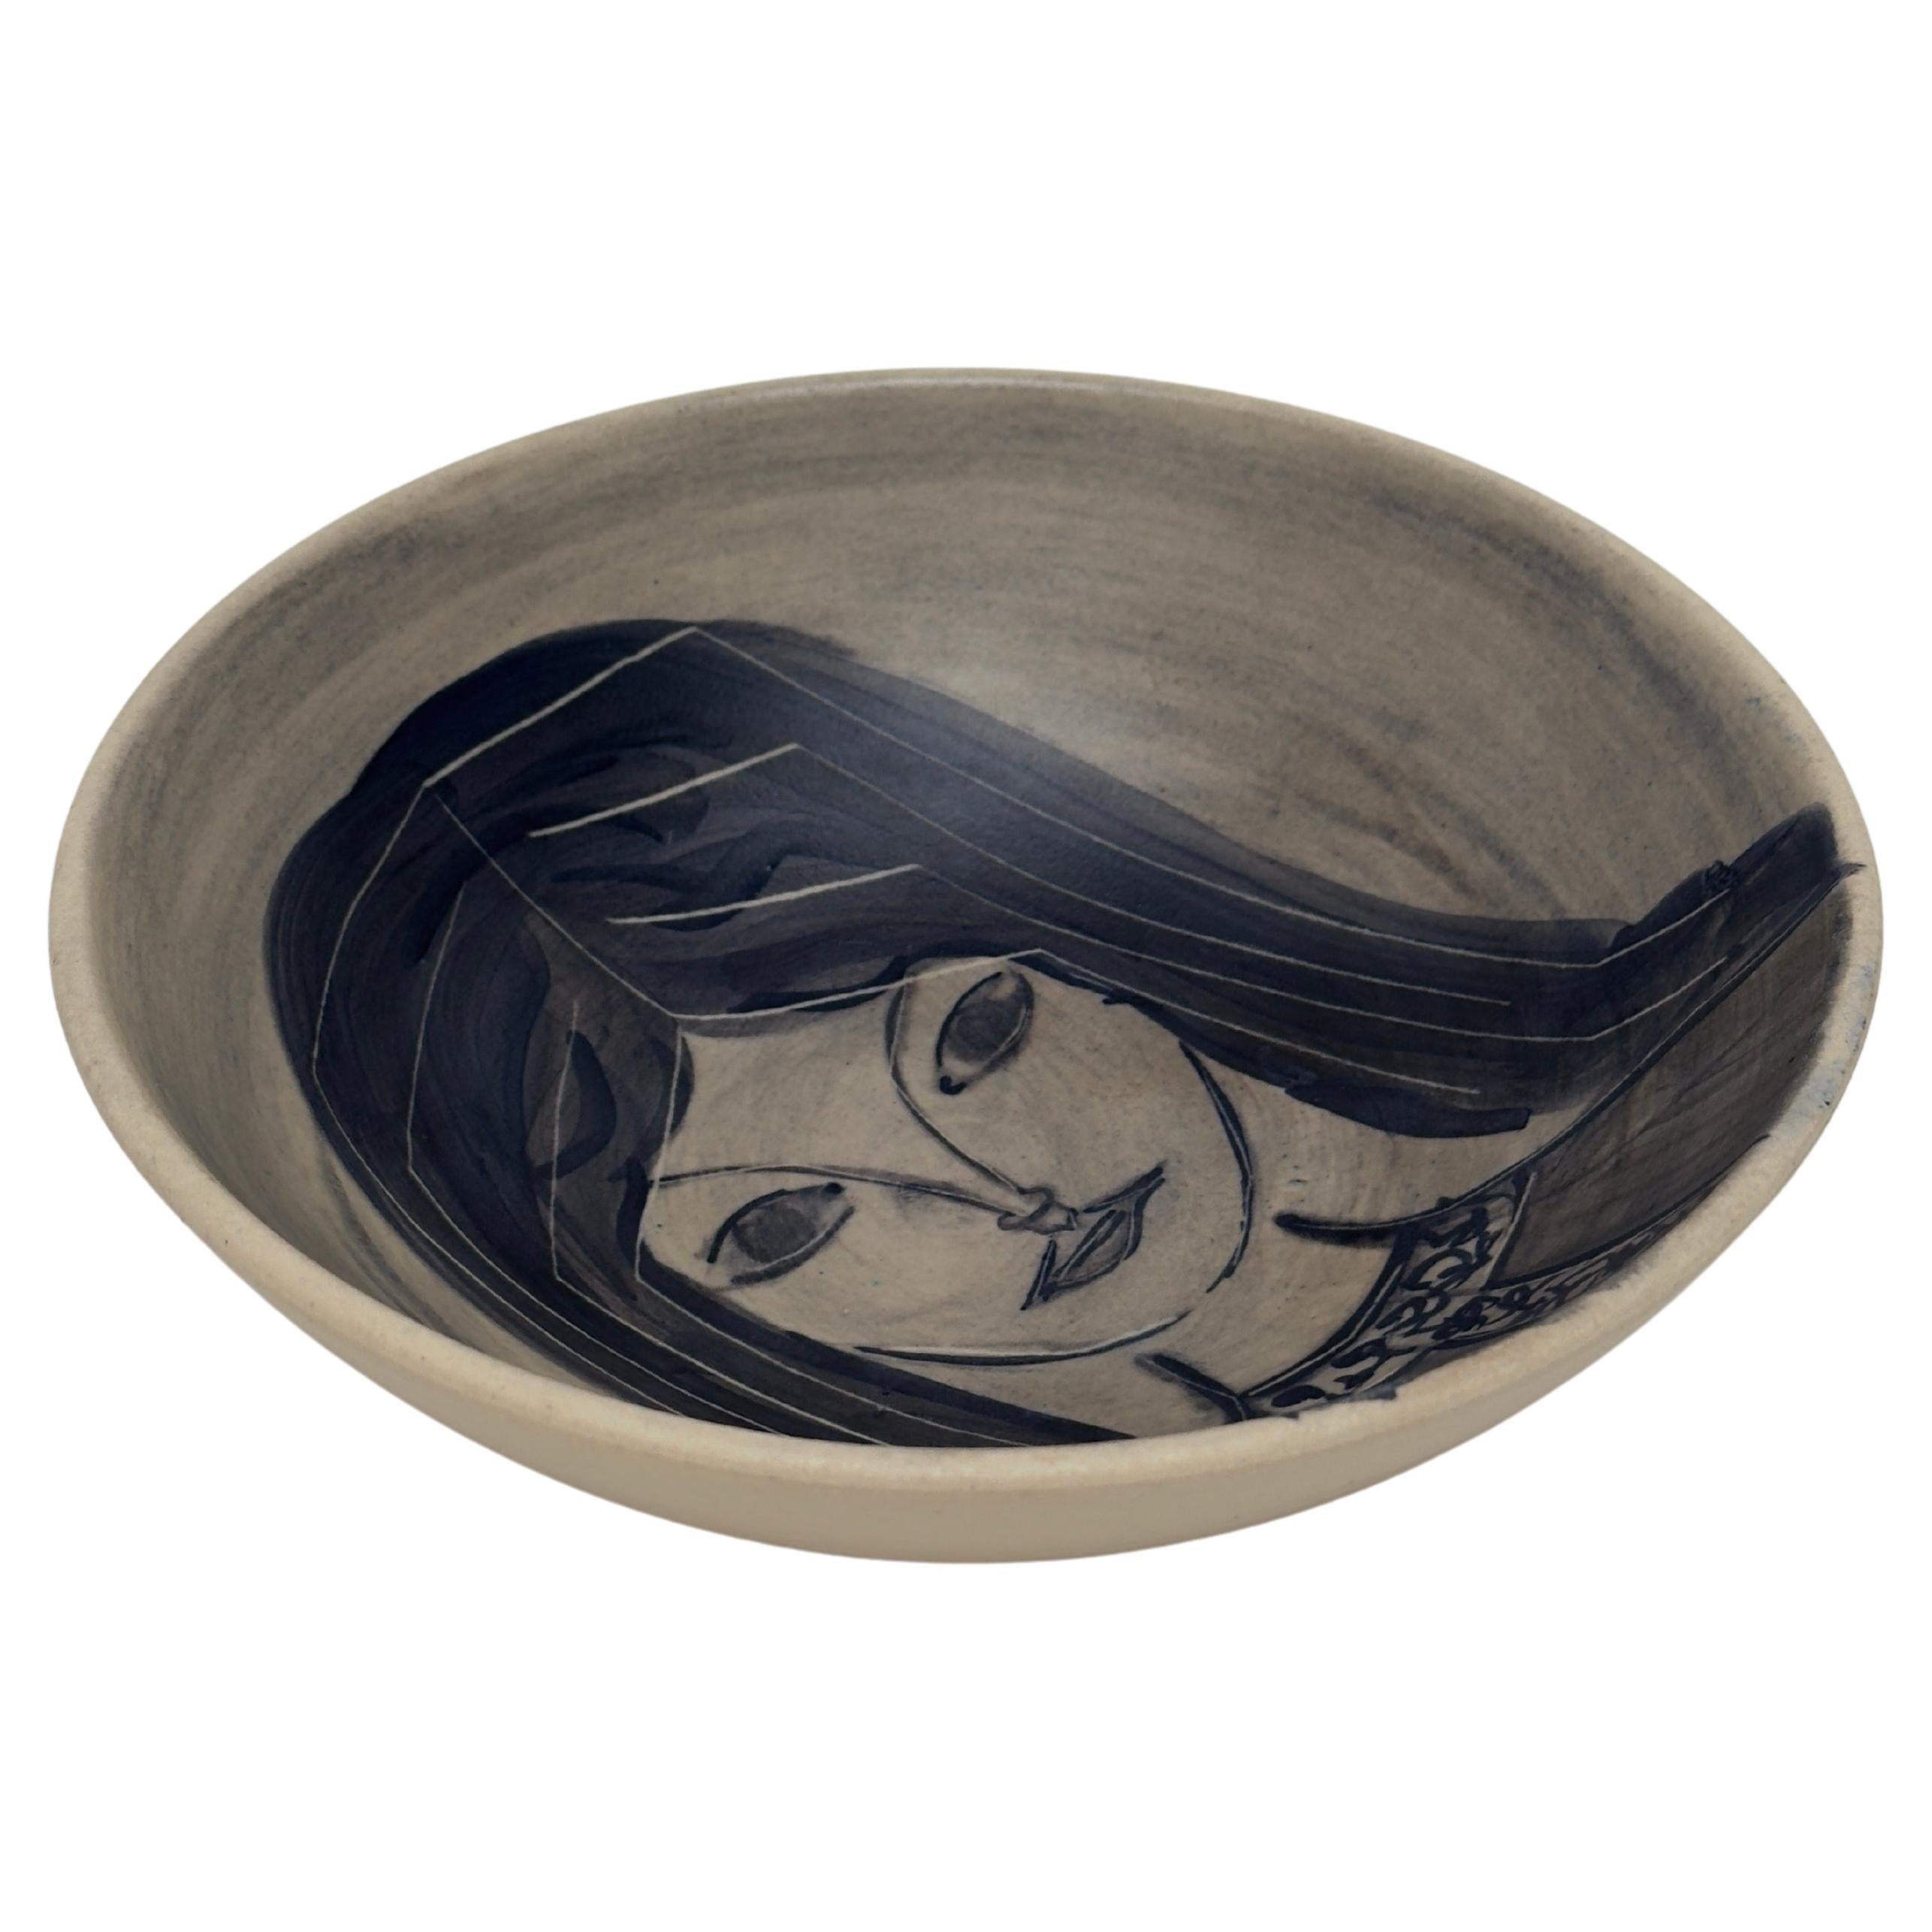 Decorative Bowl, Pyot Thiry, Vallauris c. 1960 For Sale